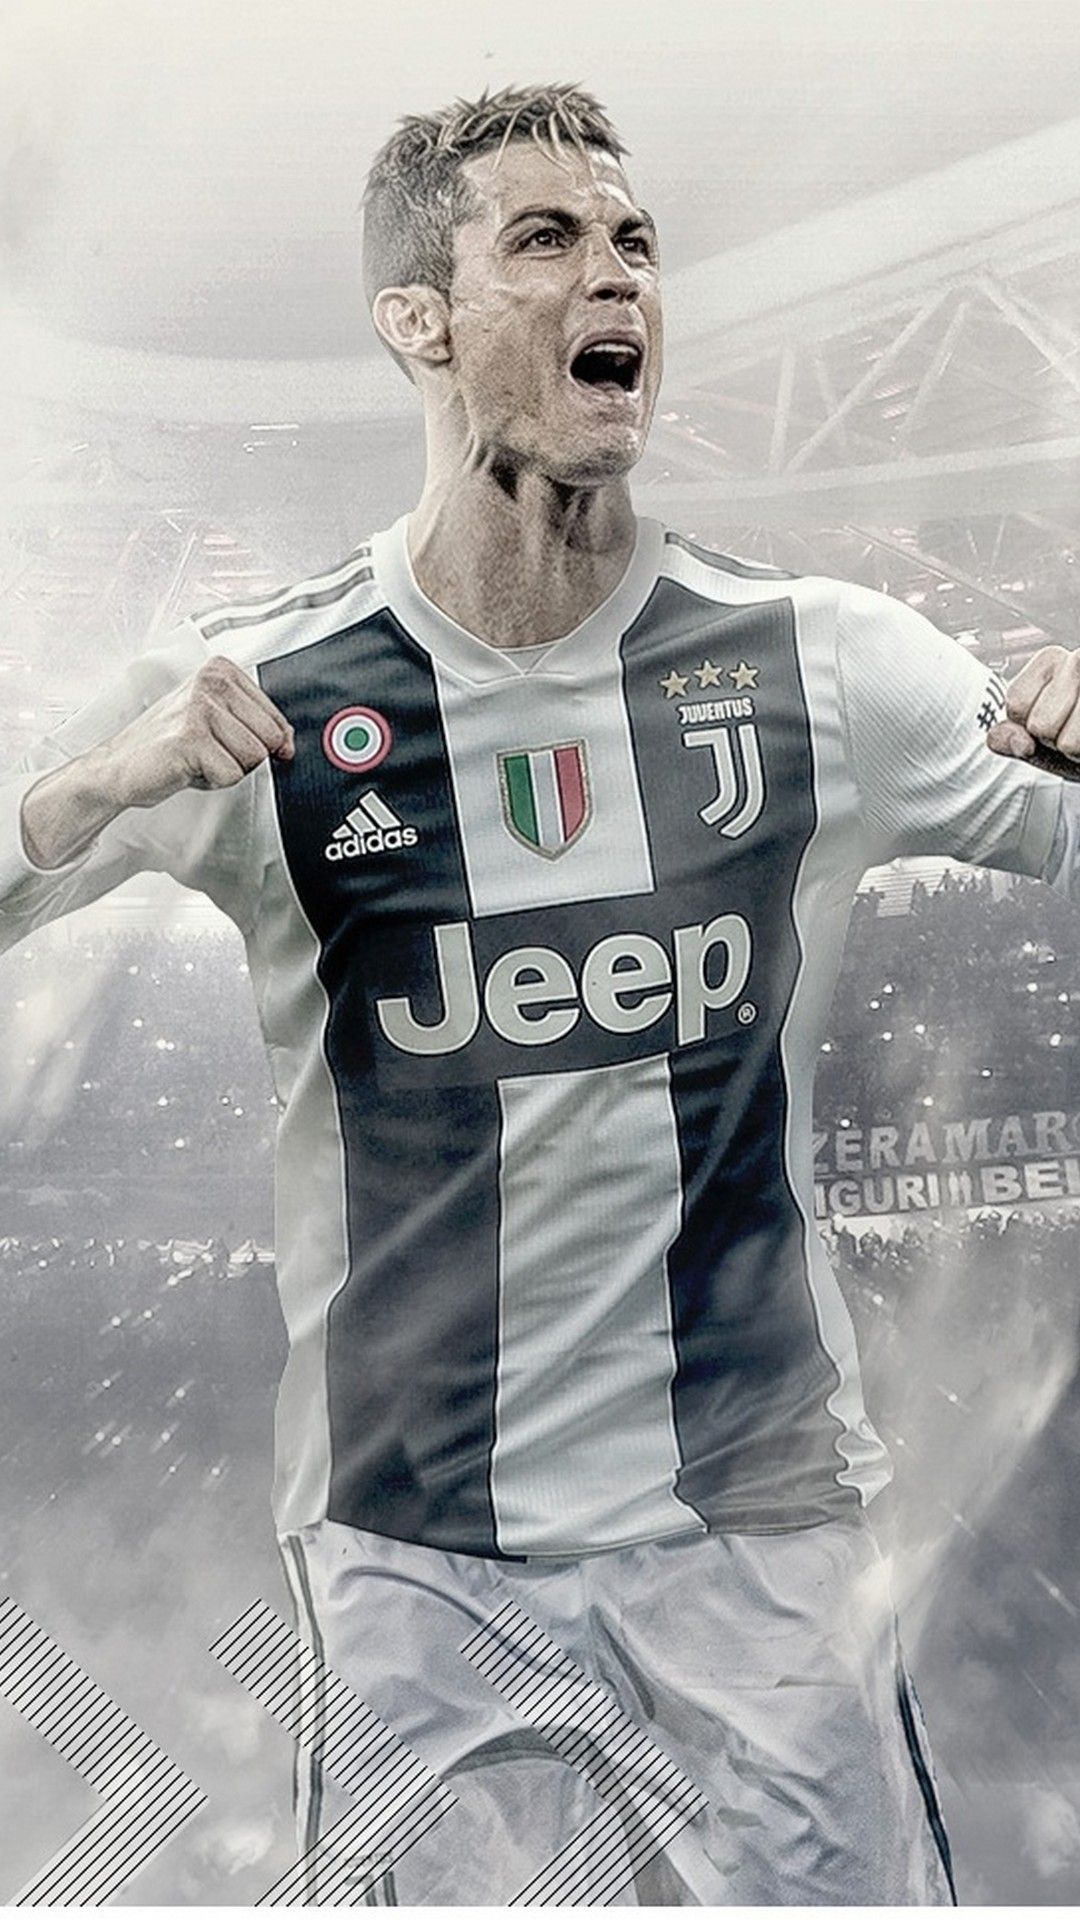 Free download Wallpaper Android Cristiano Ronaldo Juventus 2020 Android Wallpaper [1080x1920] for your Desktop, Mobile & Tablet. Explore Cristiano Ronaldo 2020 Mobile Wallpaper. Cristiano Ronaldo 2020 Mobile Wallpaper, Cristiano